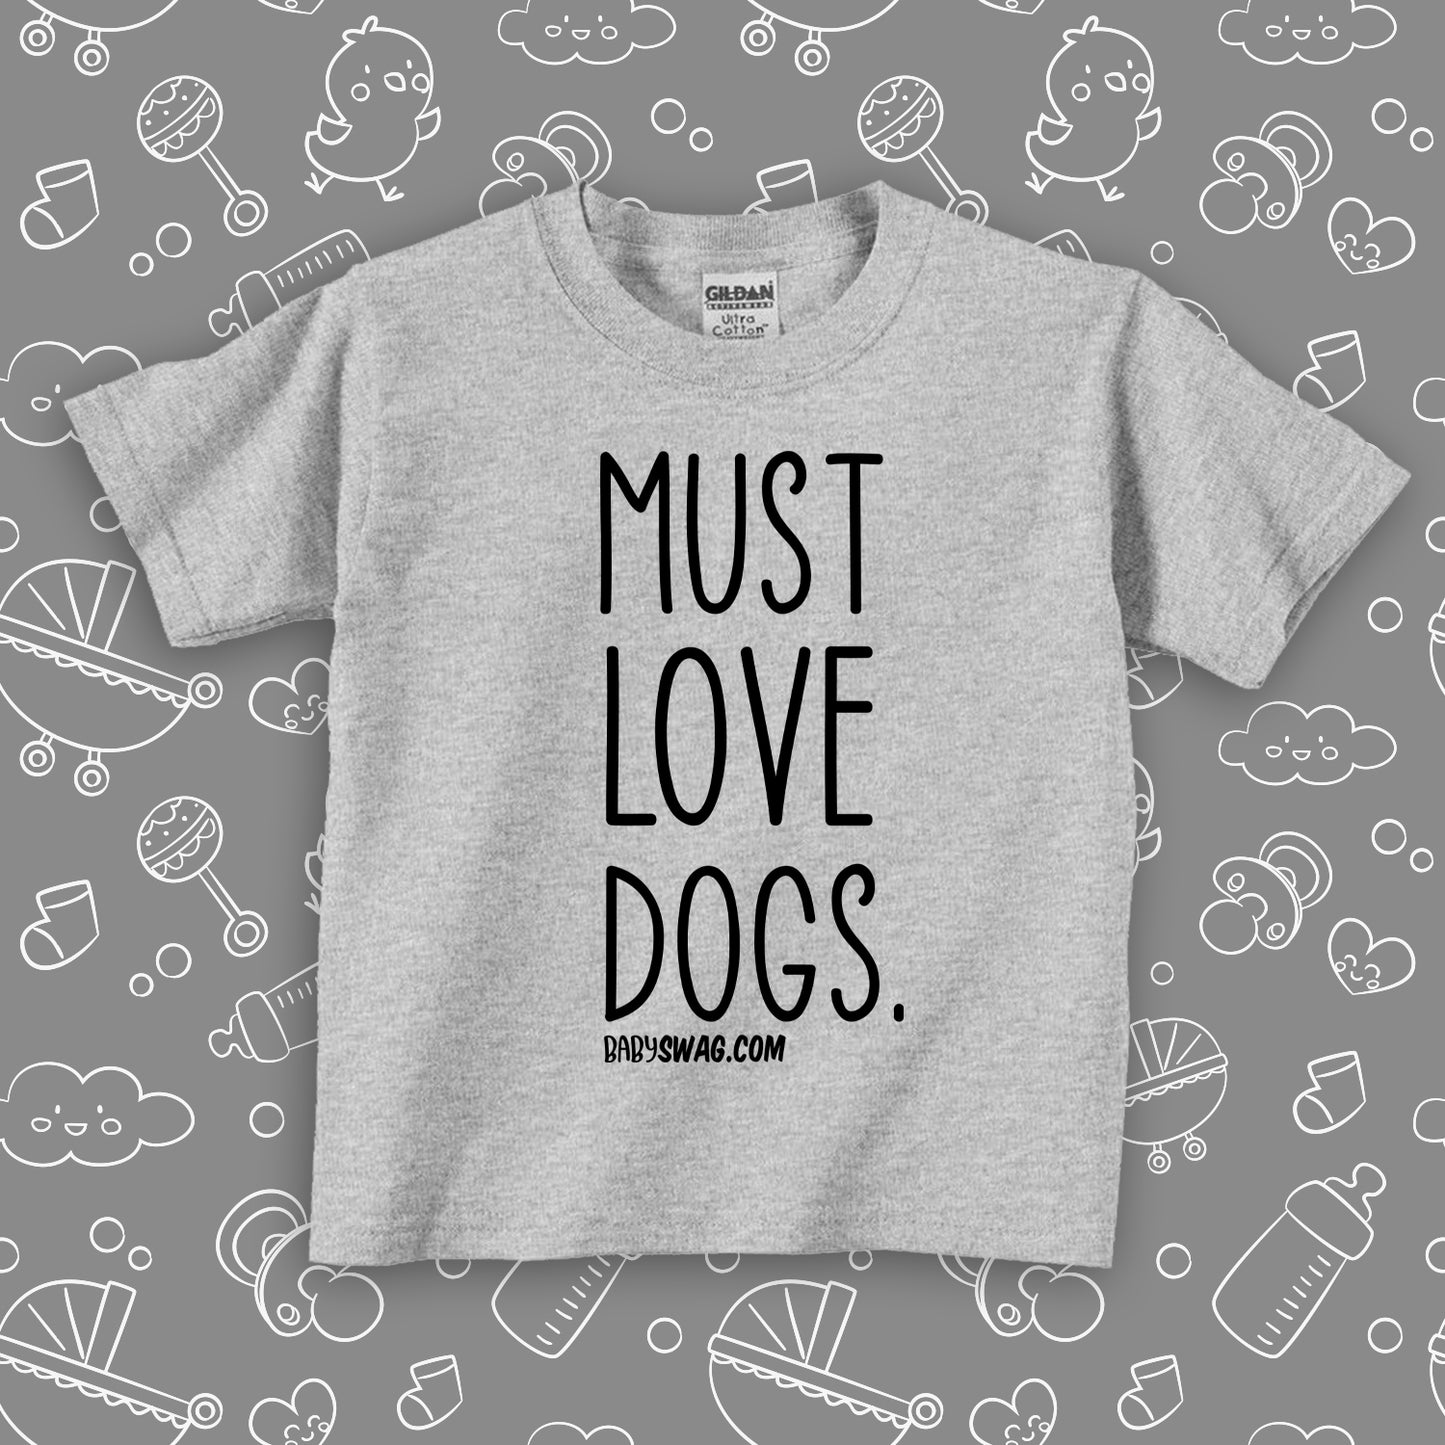 Toddler shirts with sayings "Must Love Dogs" in grey. 